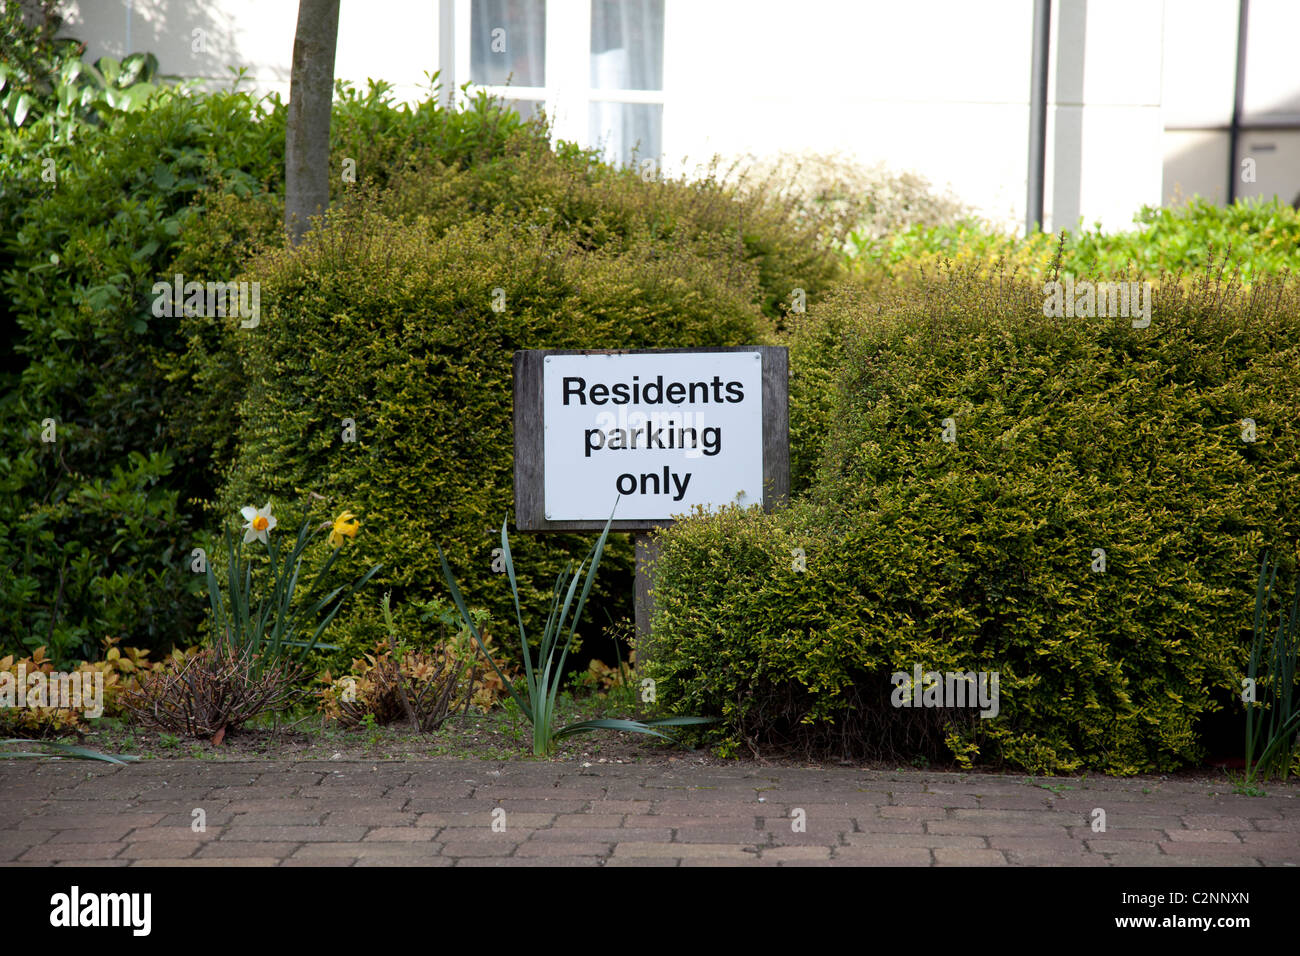 Residents parking only sign in private residential estate Stock Photo